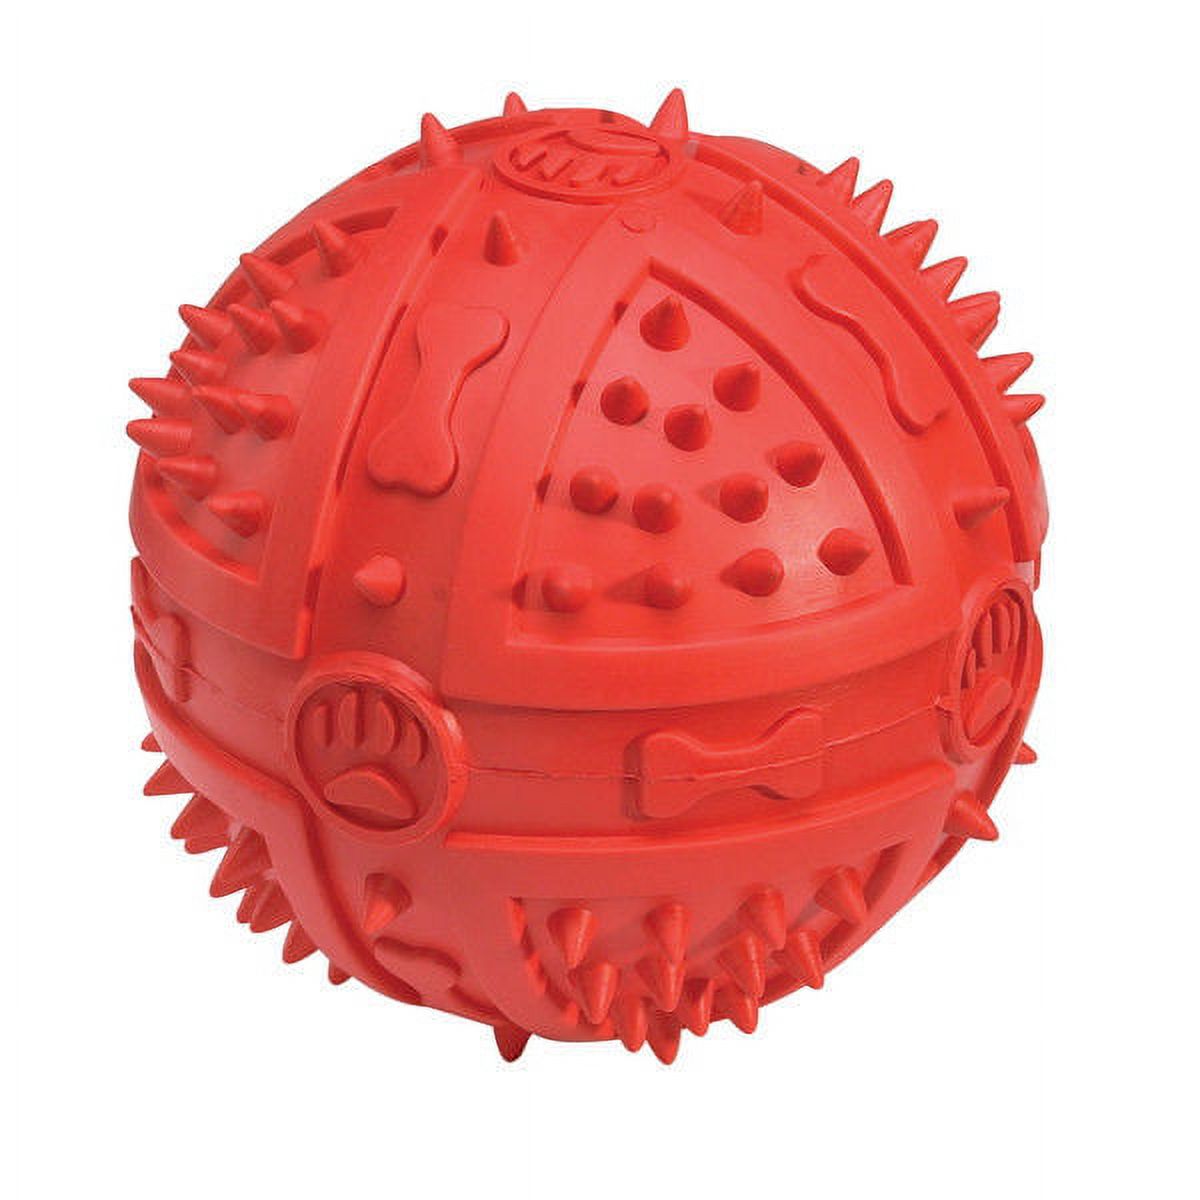 Chompy Romper Ball Dog Toys Colorful Tough Rubber Dental Chew Squeakers 3 3/4" (Red) - image 1 of 1